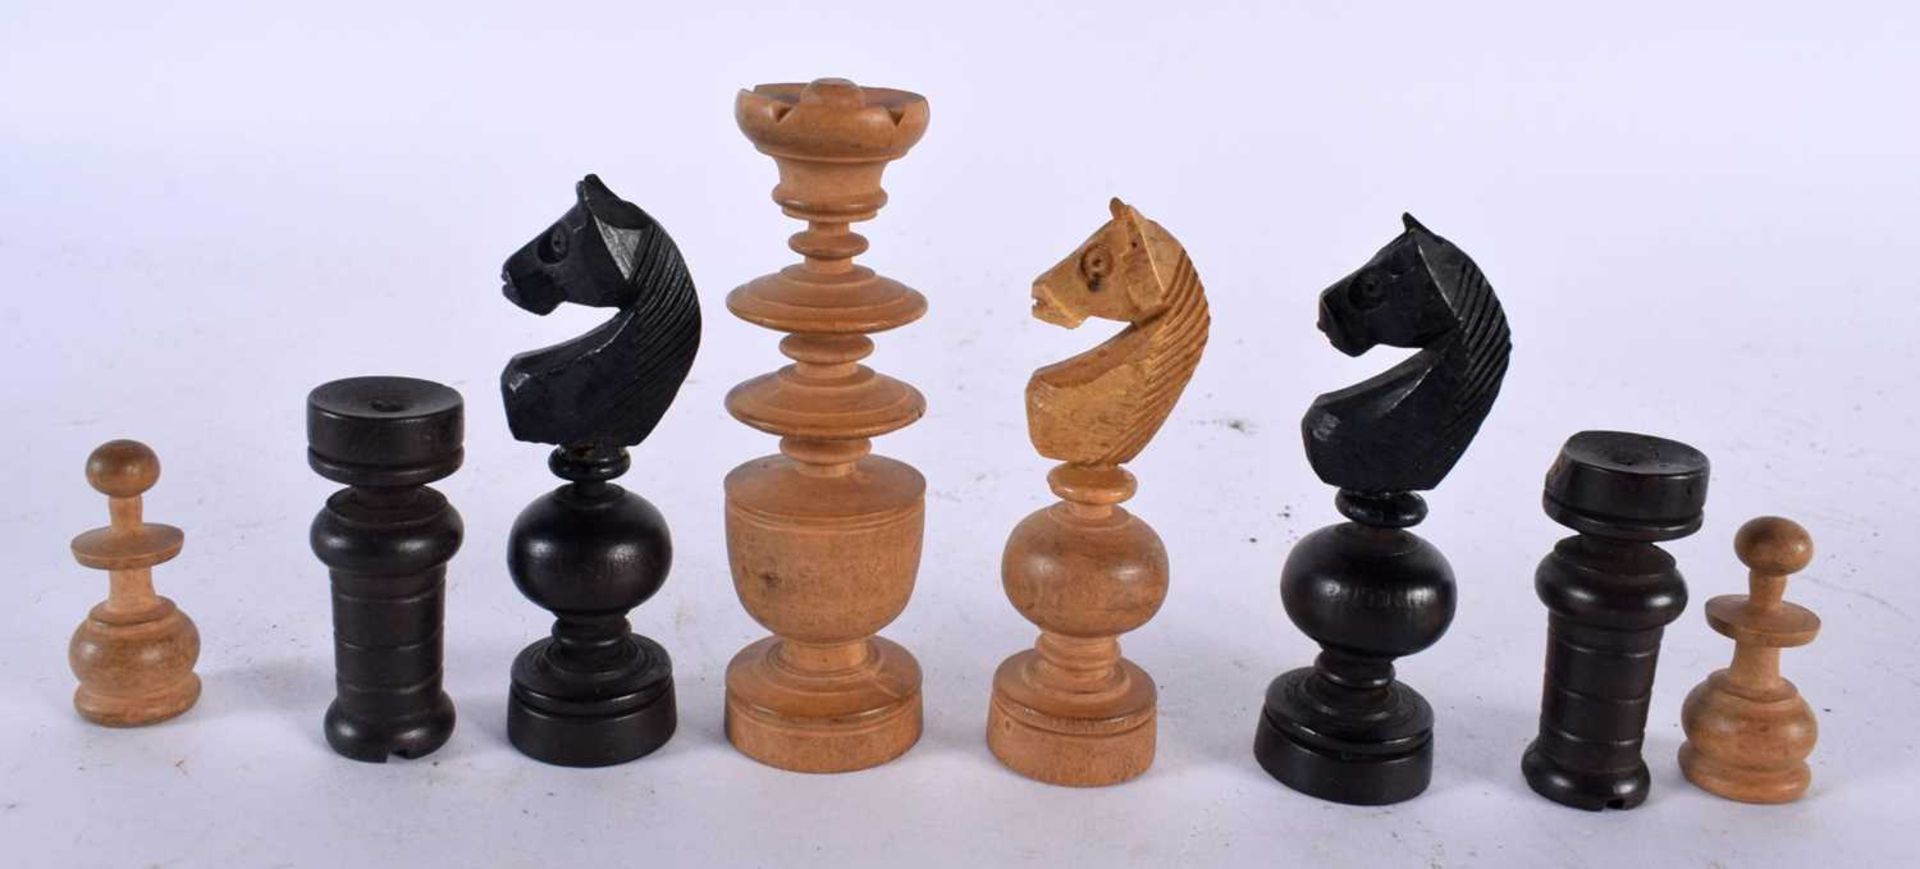 A VINTAGE CARVED WOOD CHESS SET. Largest 6 cm high. (qty) - Image 2 of 3